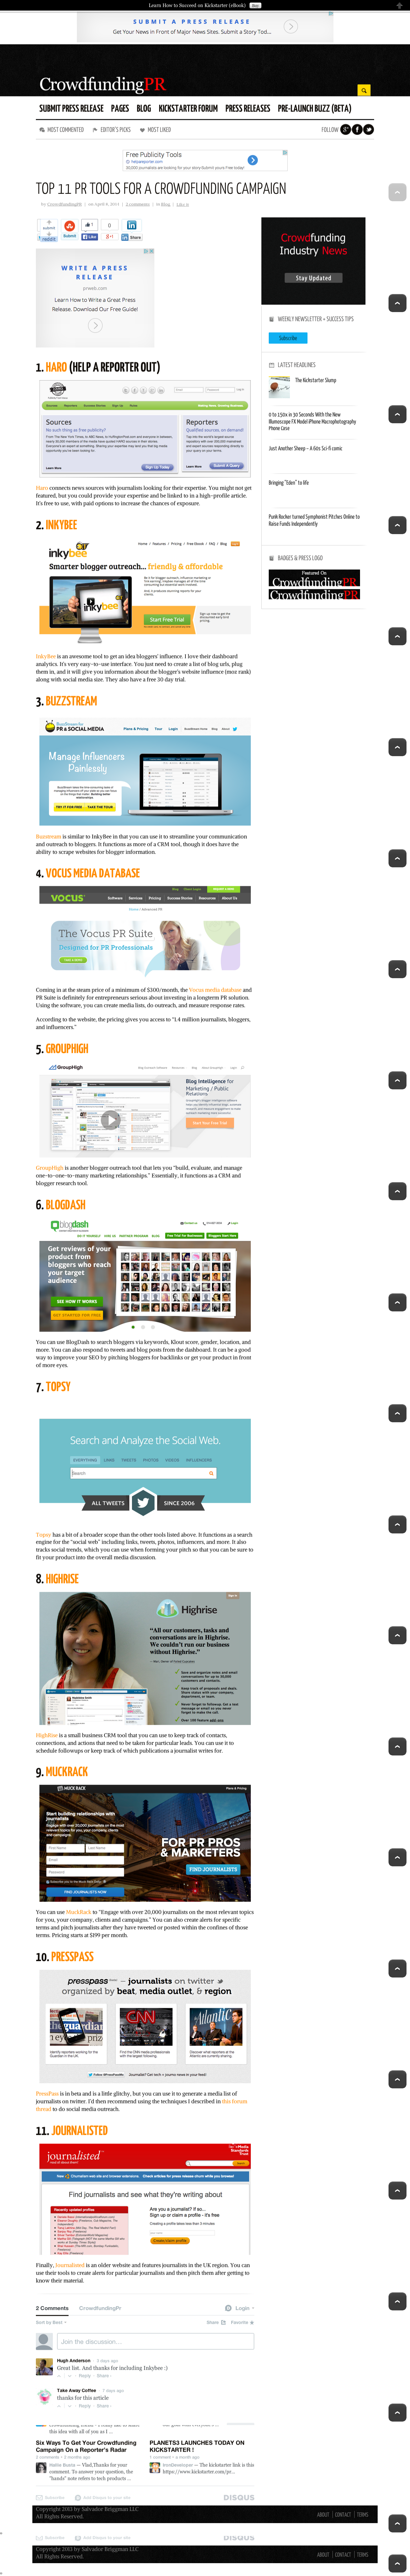 screenshot-by-nimbus-www-crowdfundingpr-org-pr-tools-for-a-crowdfunding-campaign.png